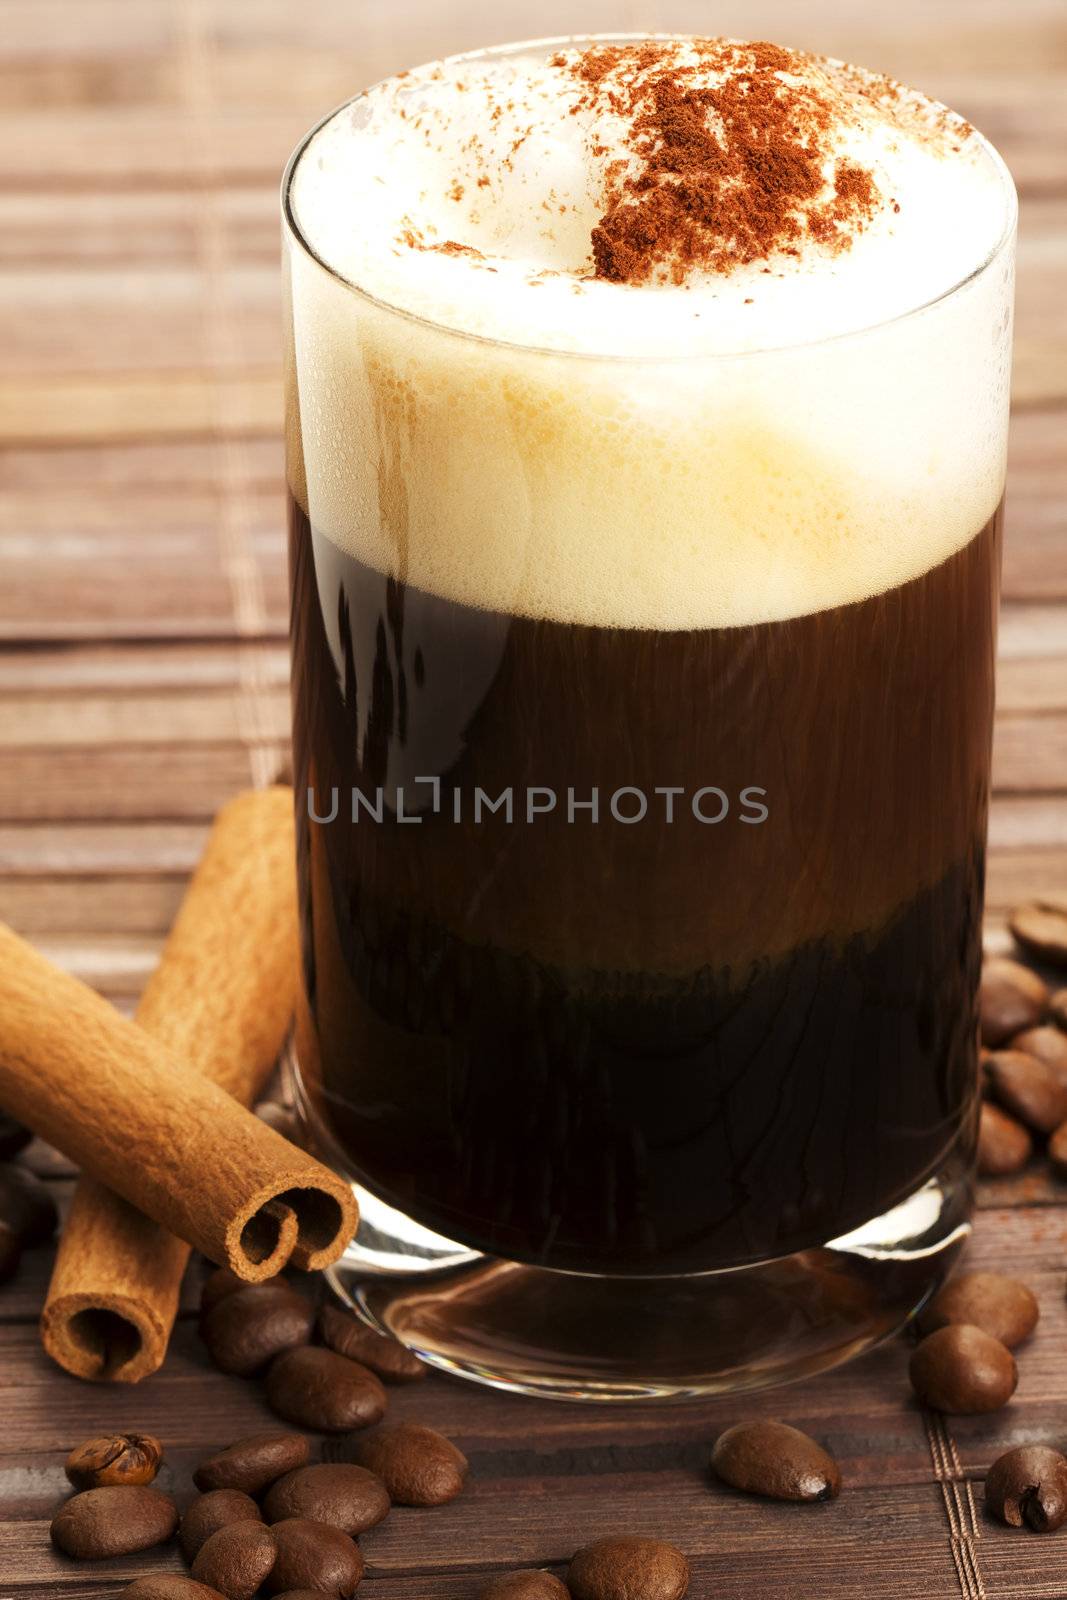 espresso in a straigt glass with milk froth cocoa powder, cinnamon sticks and coffee beans aside on wooden background